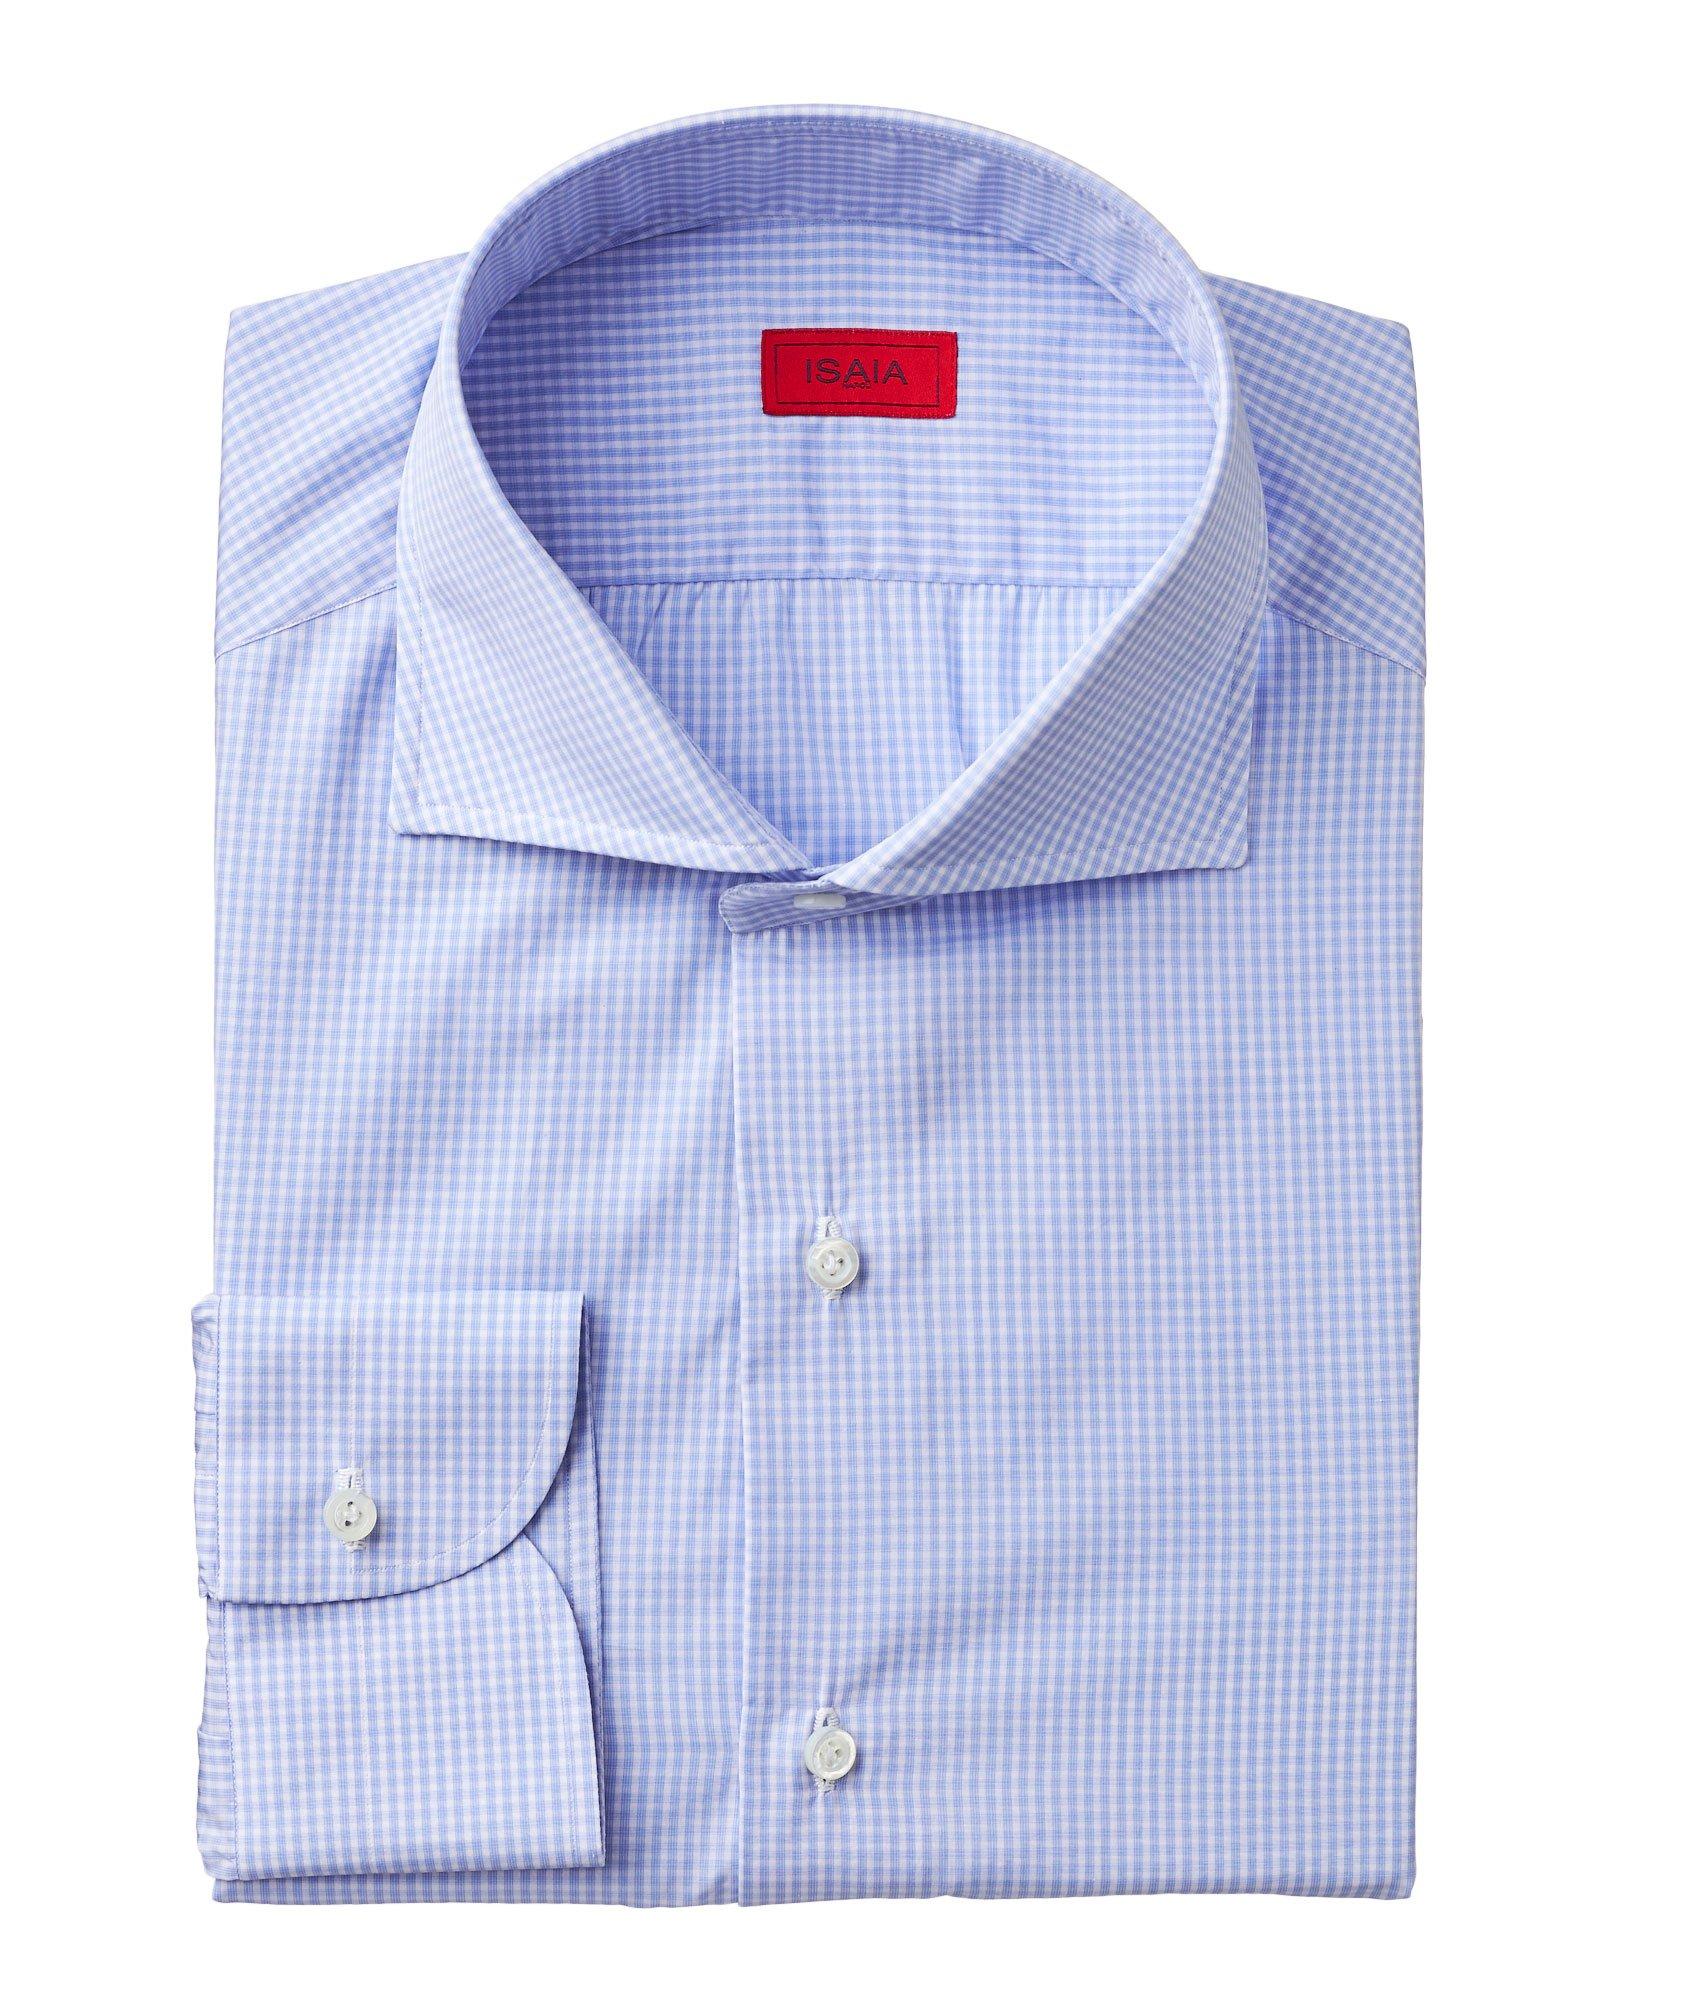 Contemporary Fit Gingham-Printed Dress Shirt image 0